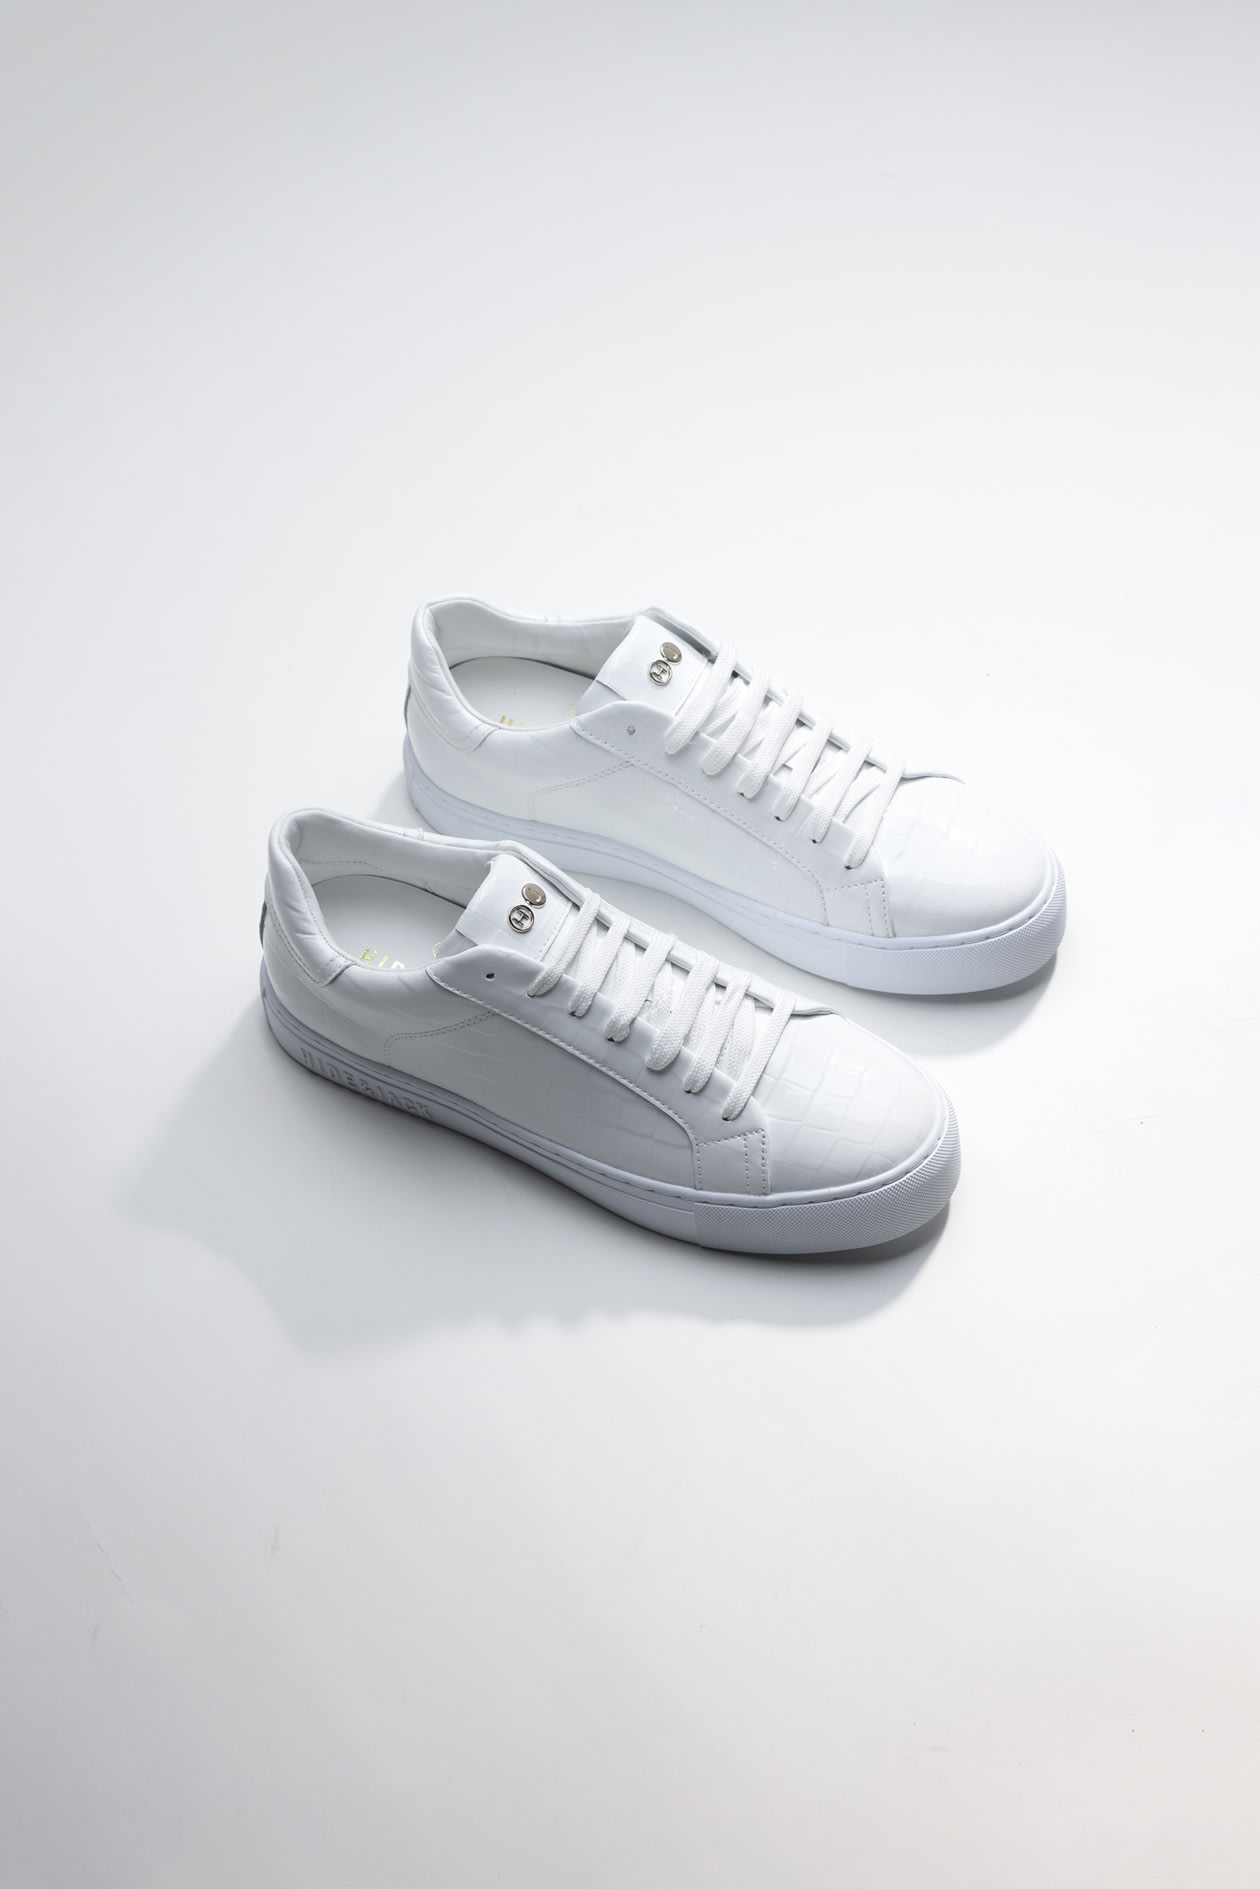 Hide&amp;jack Low Top Sneaker - Essence Glamour White